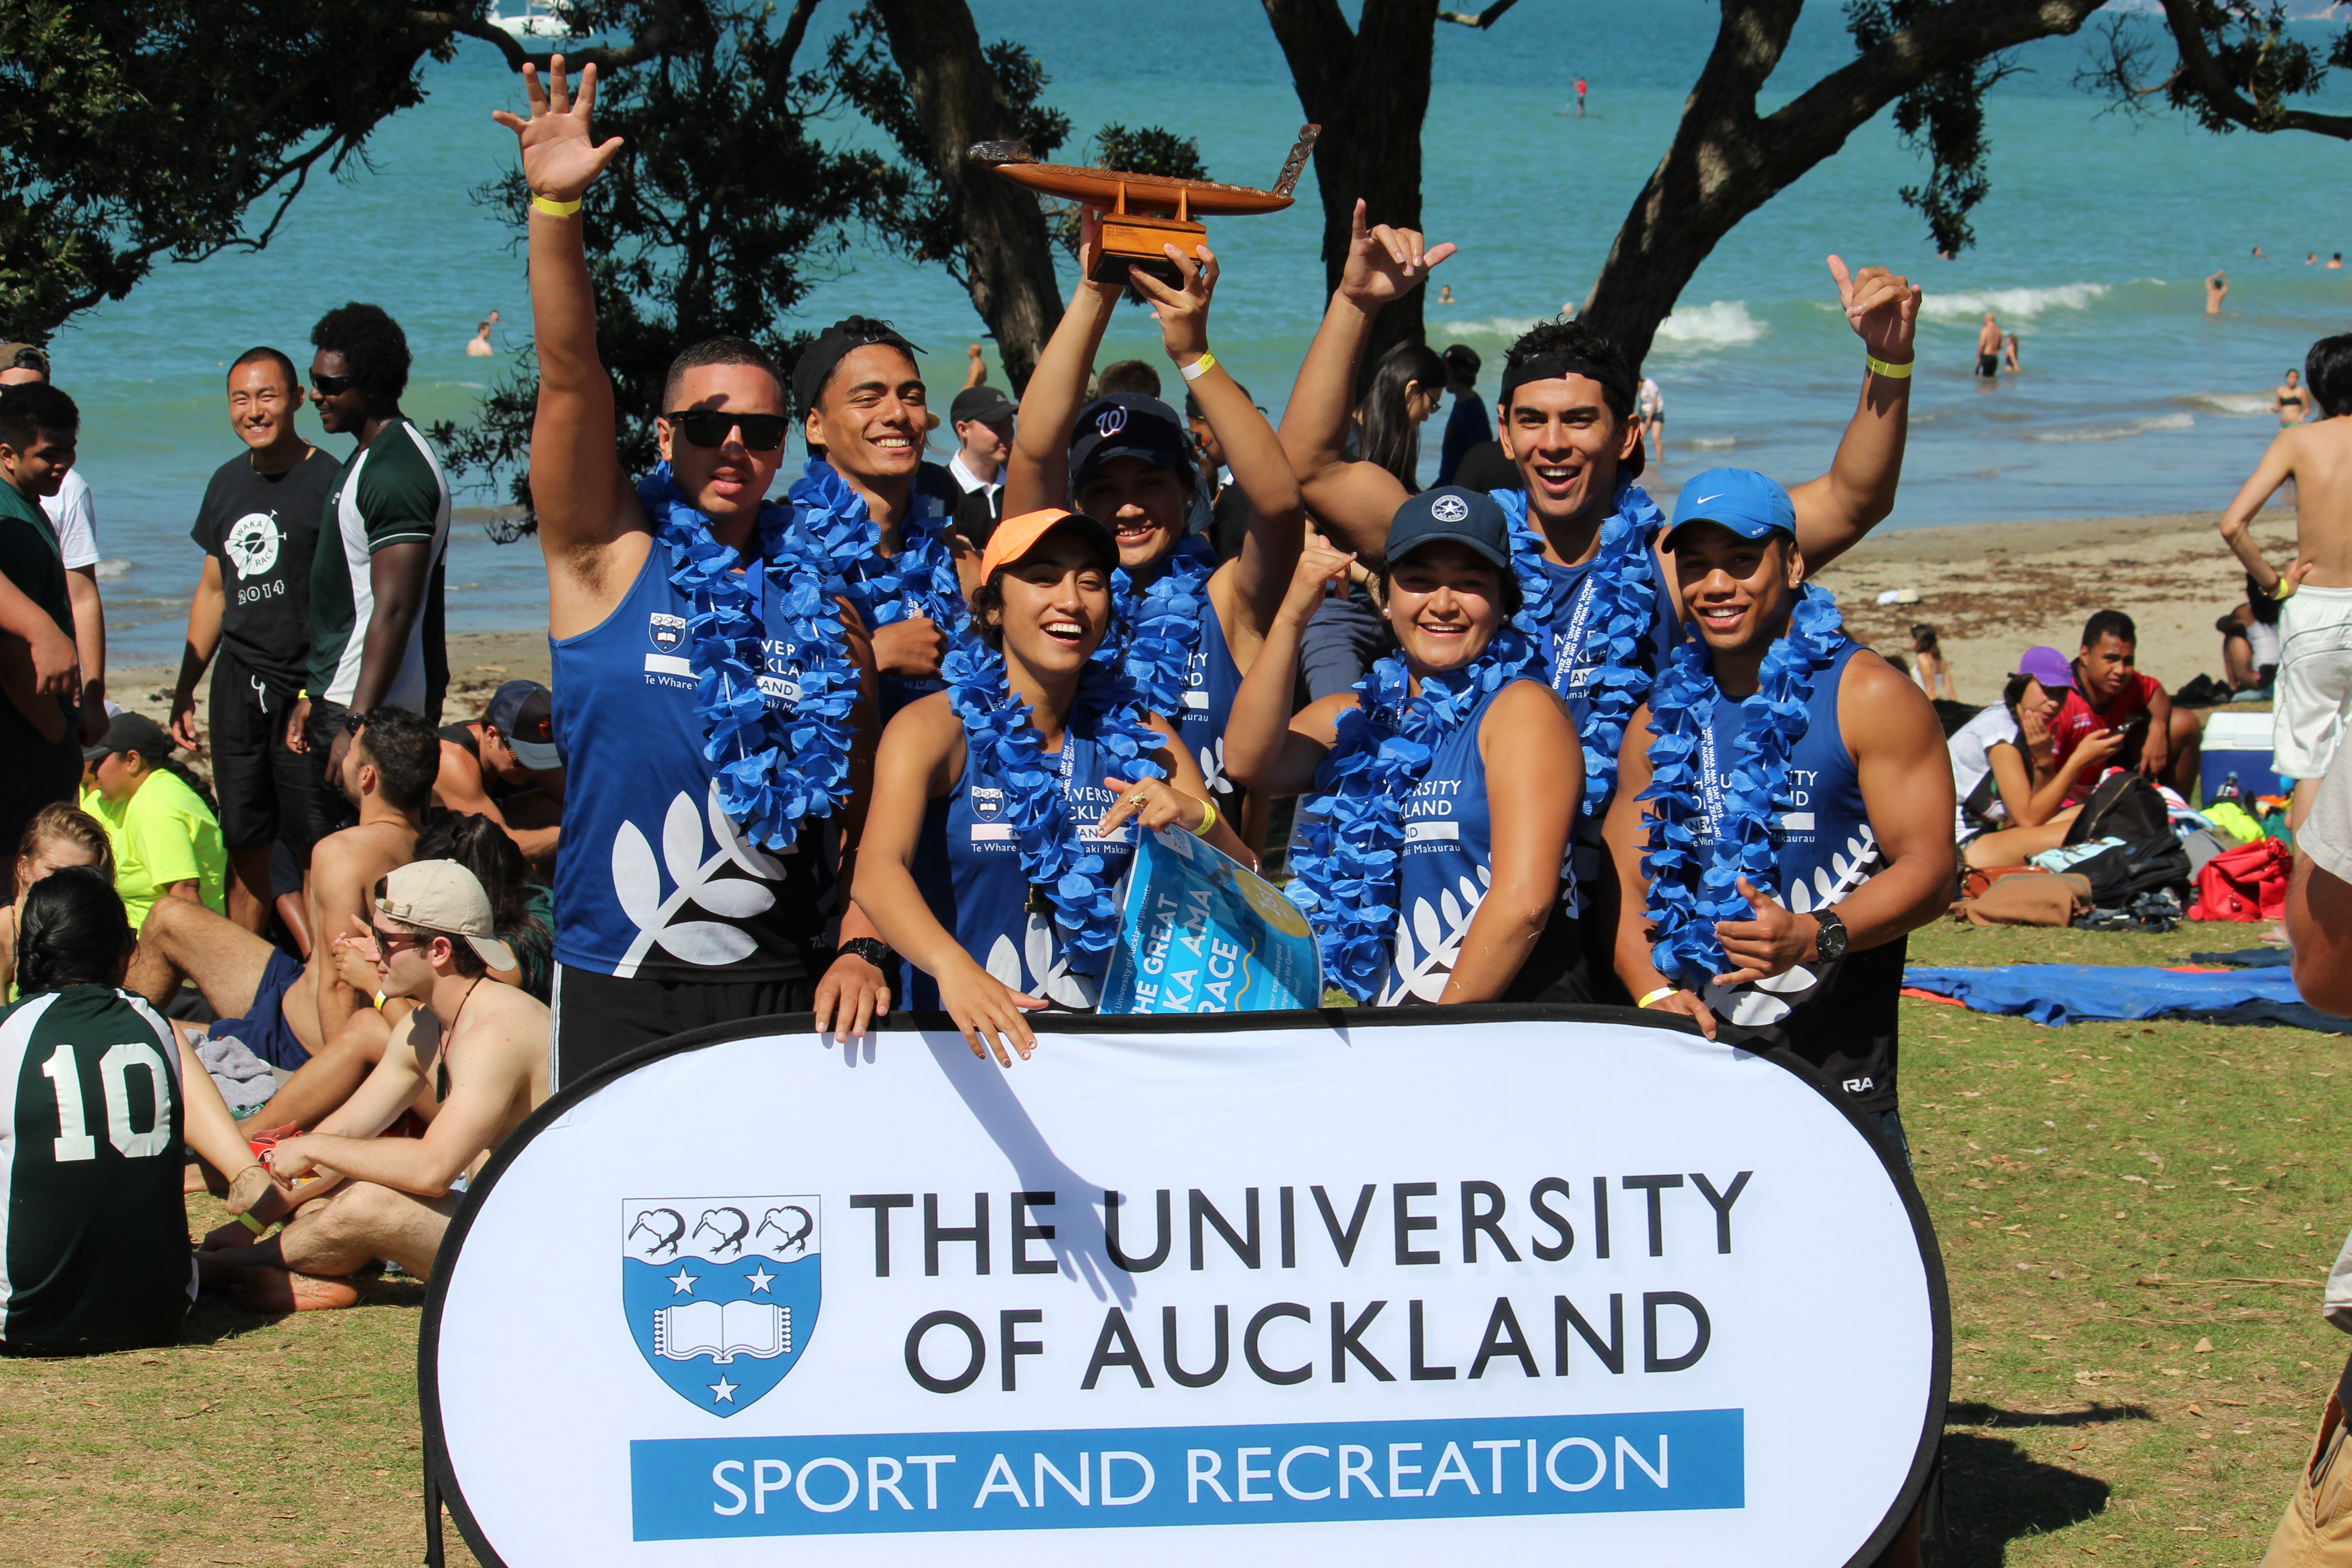 University Association to paddle in Hawaii